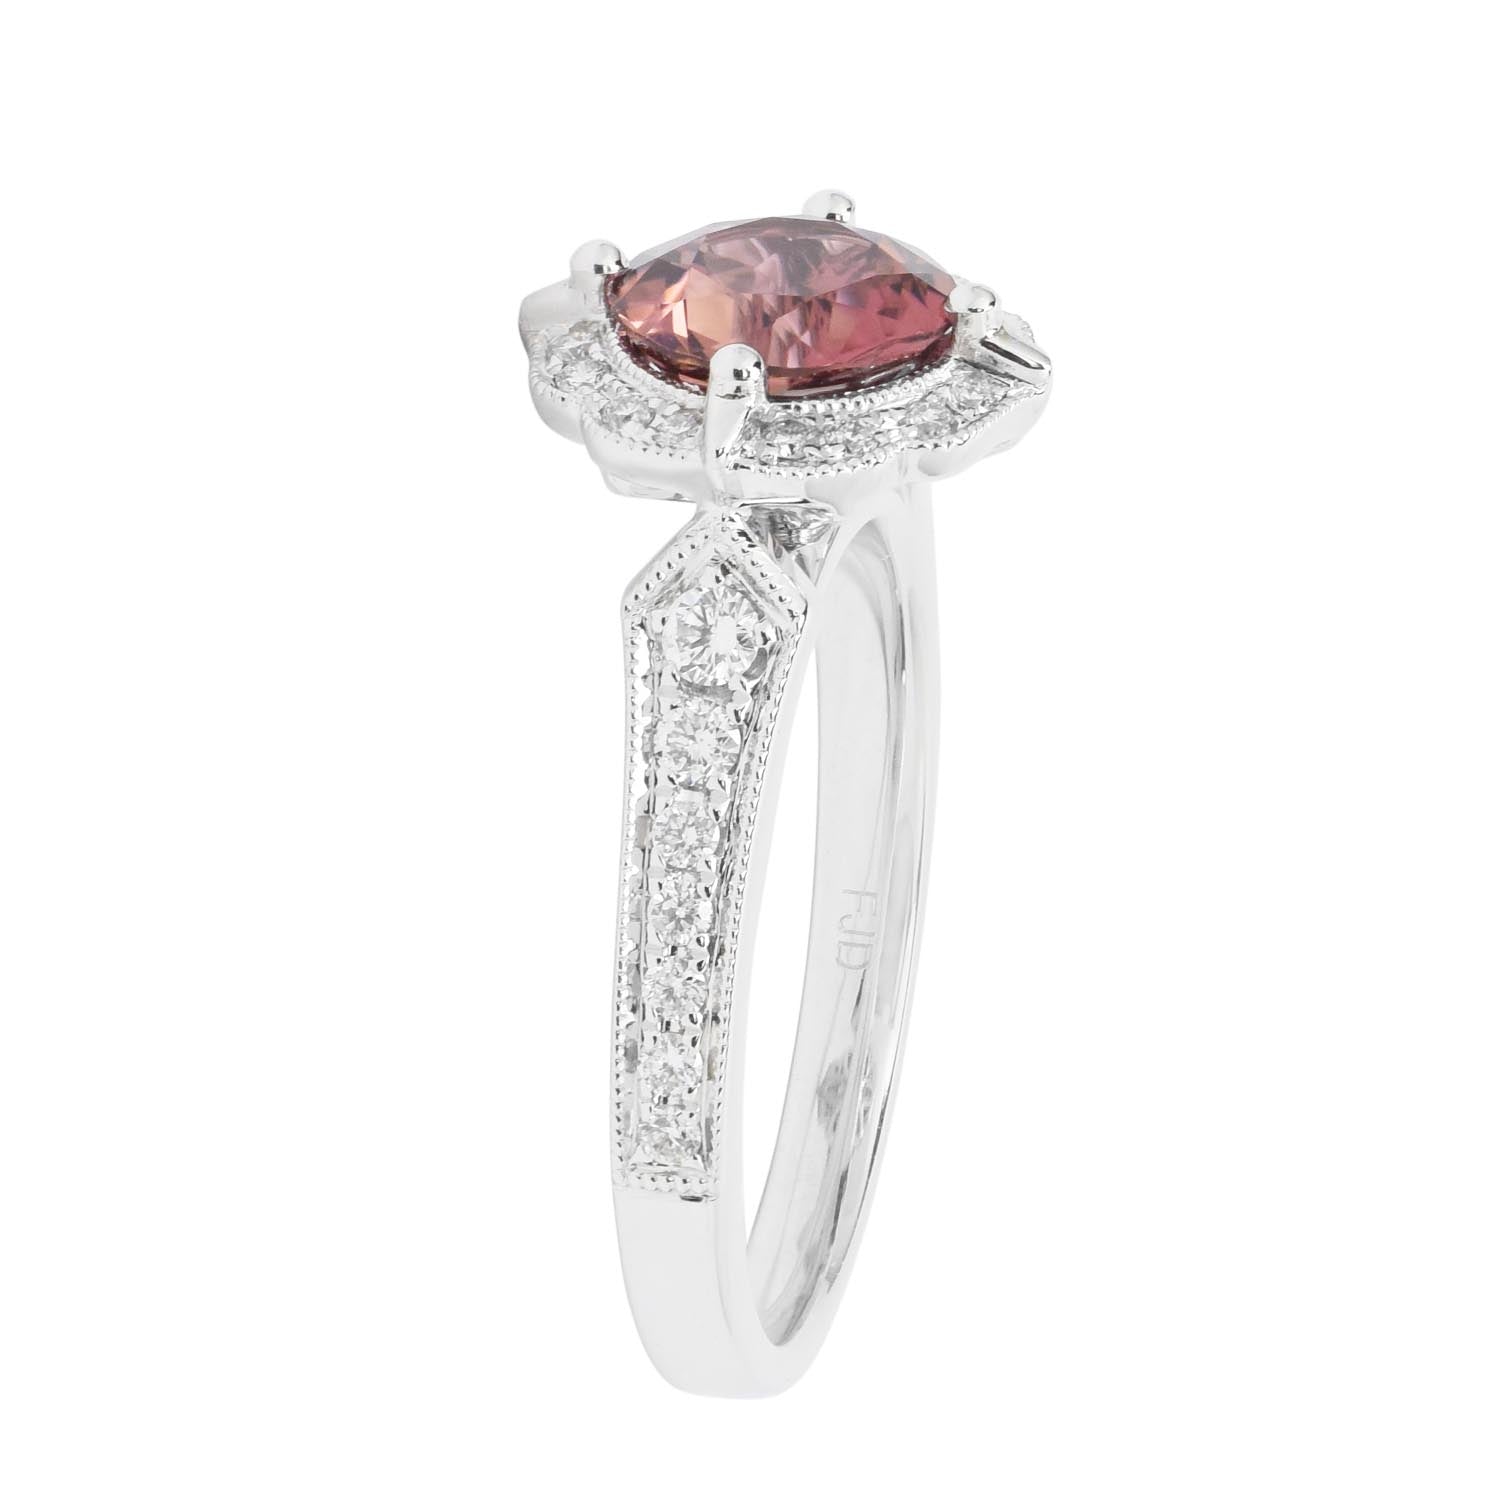 Maine Pink Tourmaline Ring in 14kt White Gold with Diamonds (1/3ct tw)